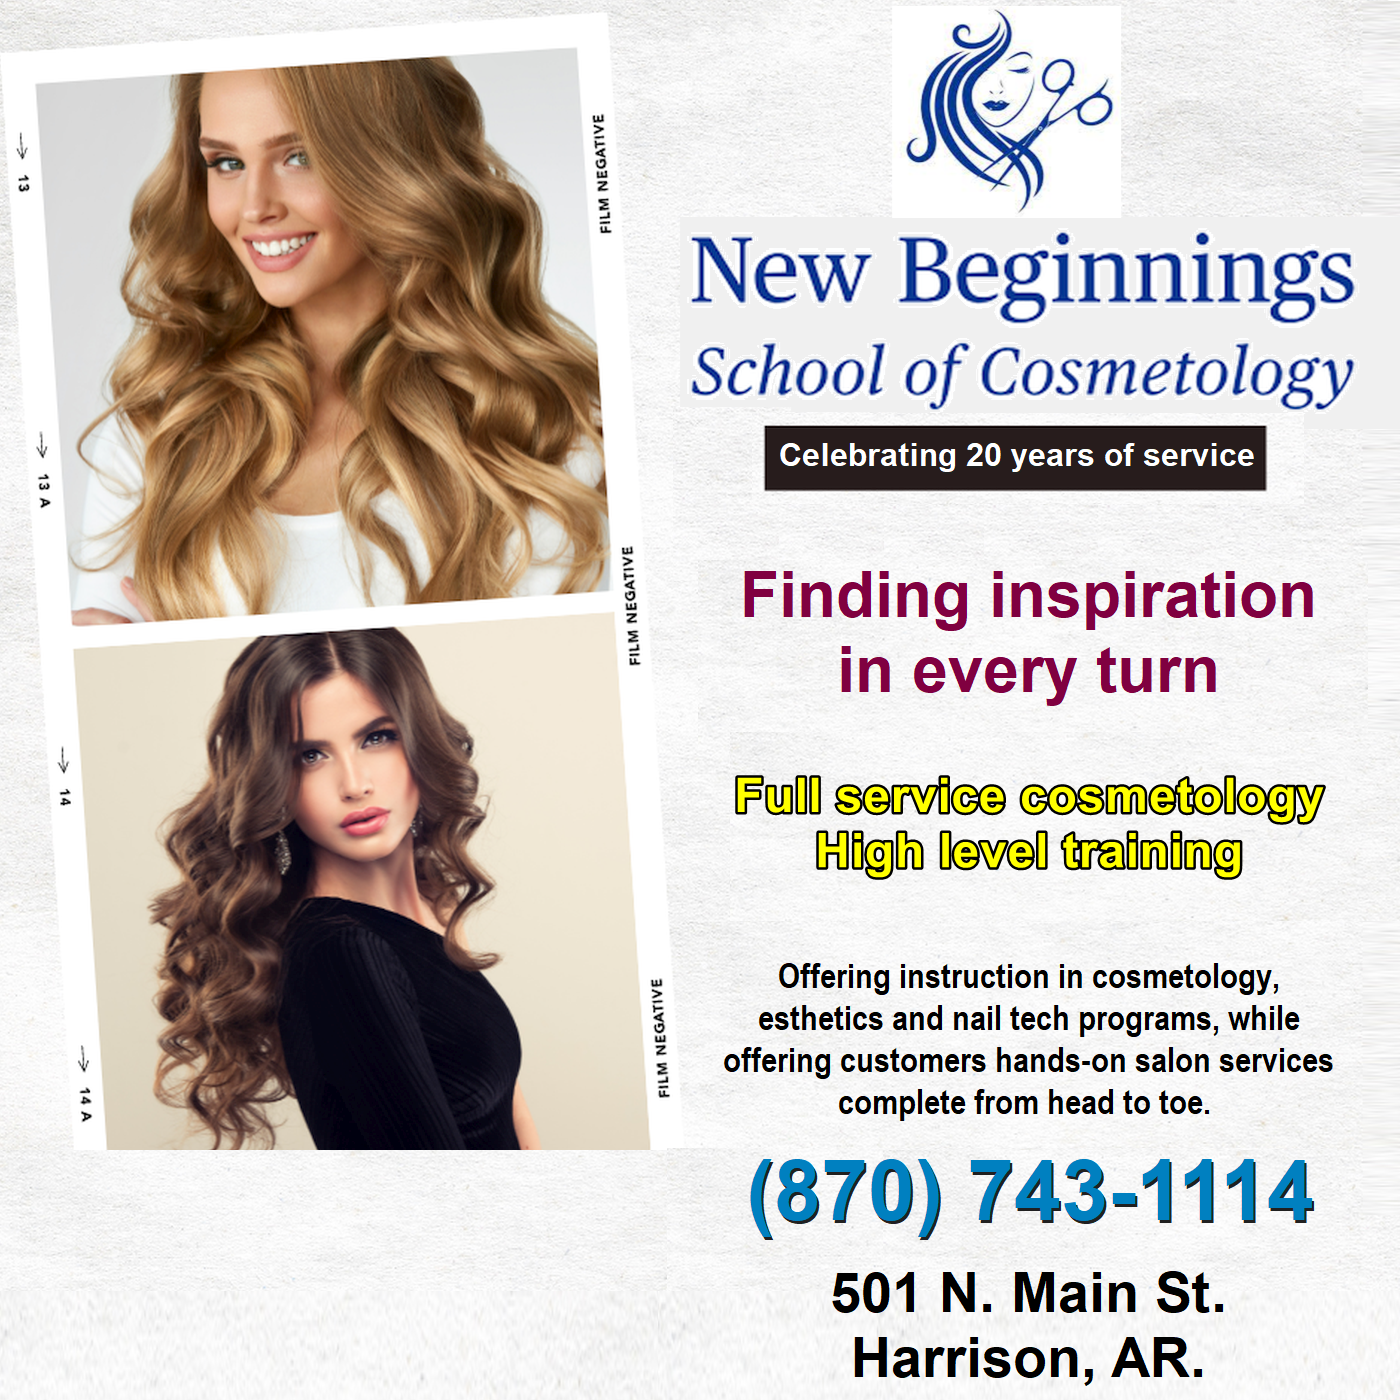 Art for New Beginnings School of Cosmetology by 501 N Main St, Harrison, AR